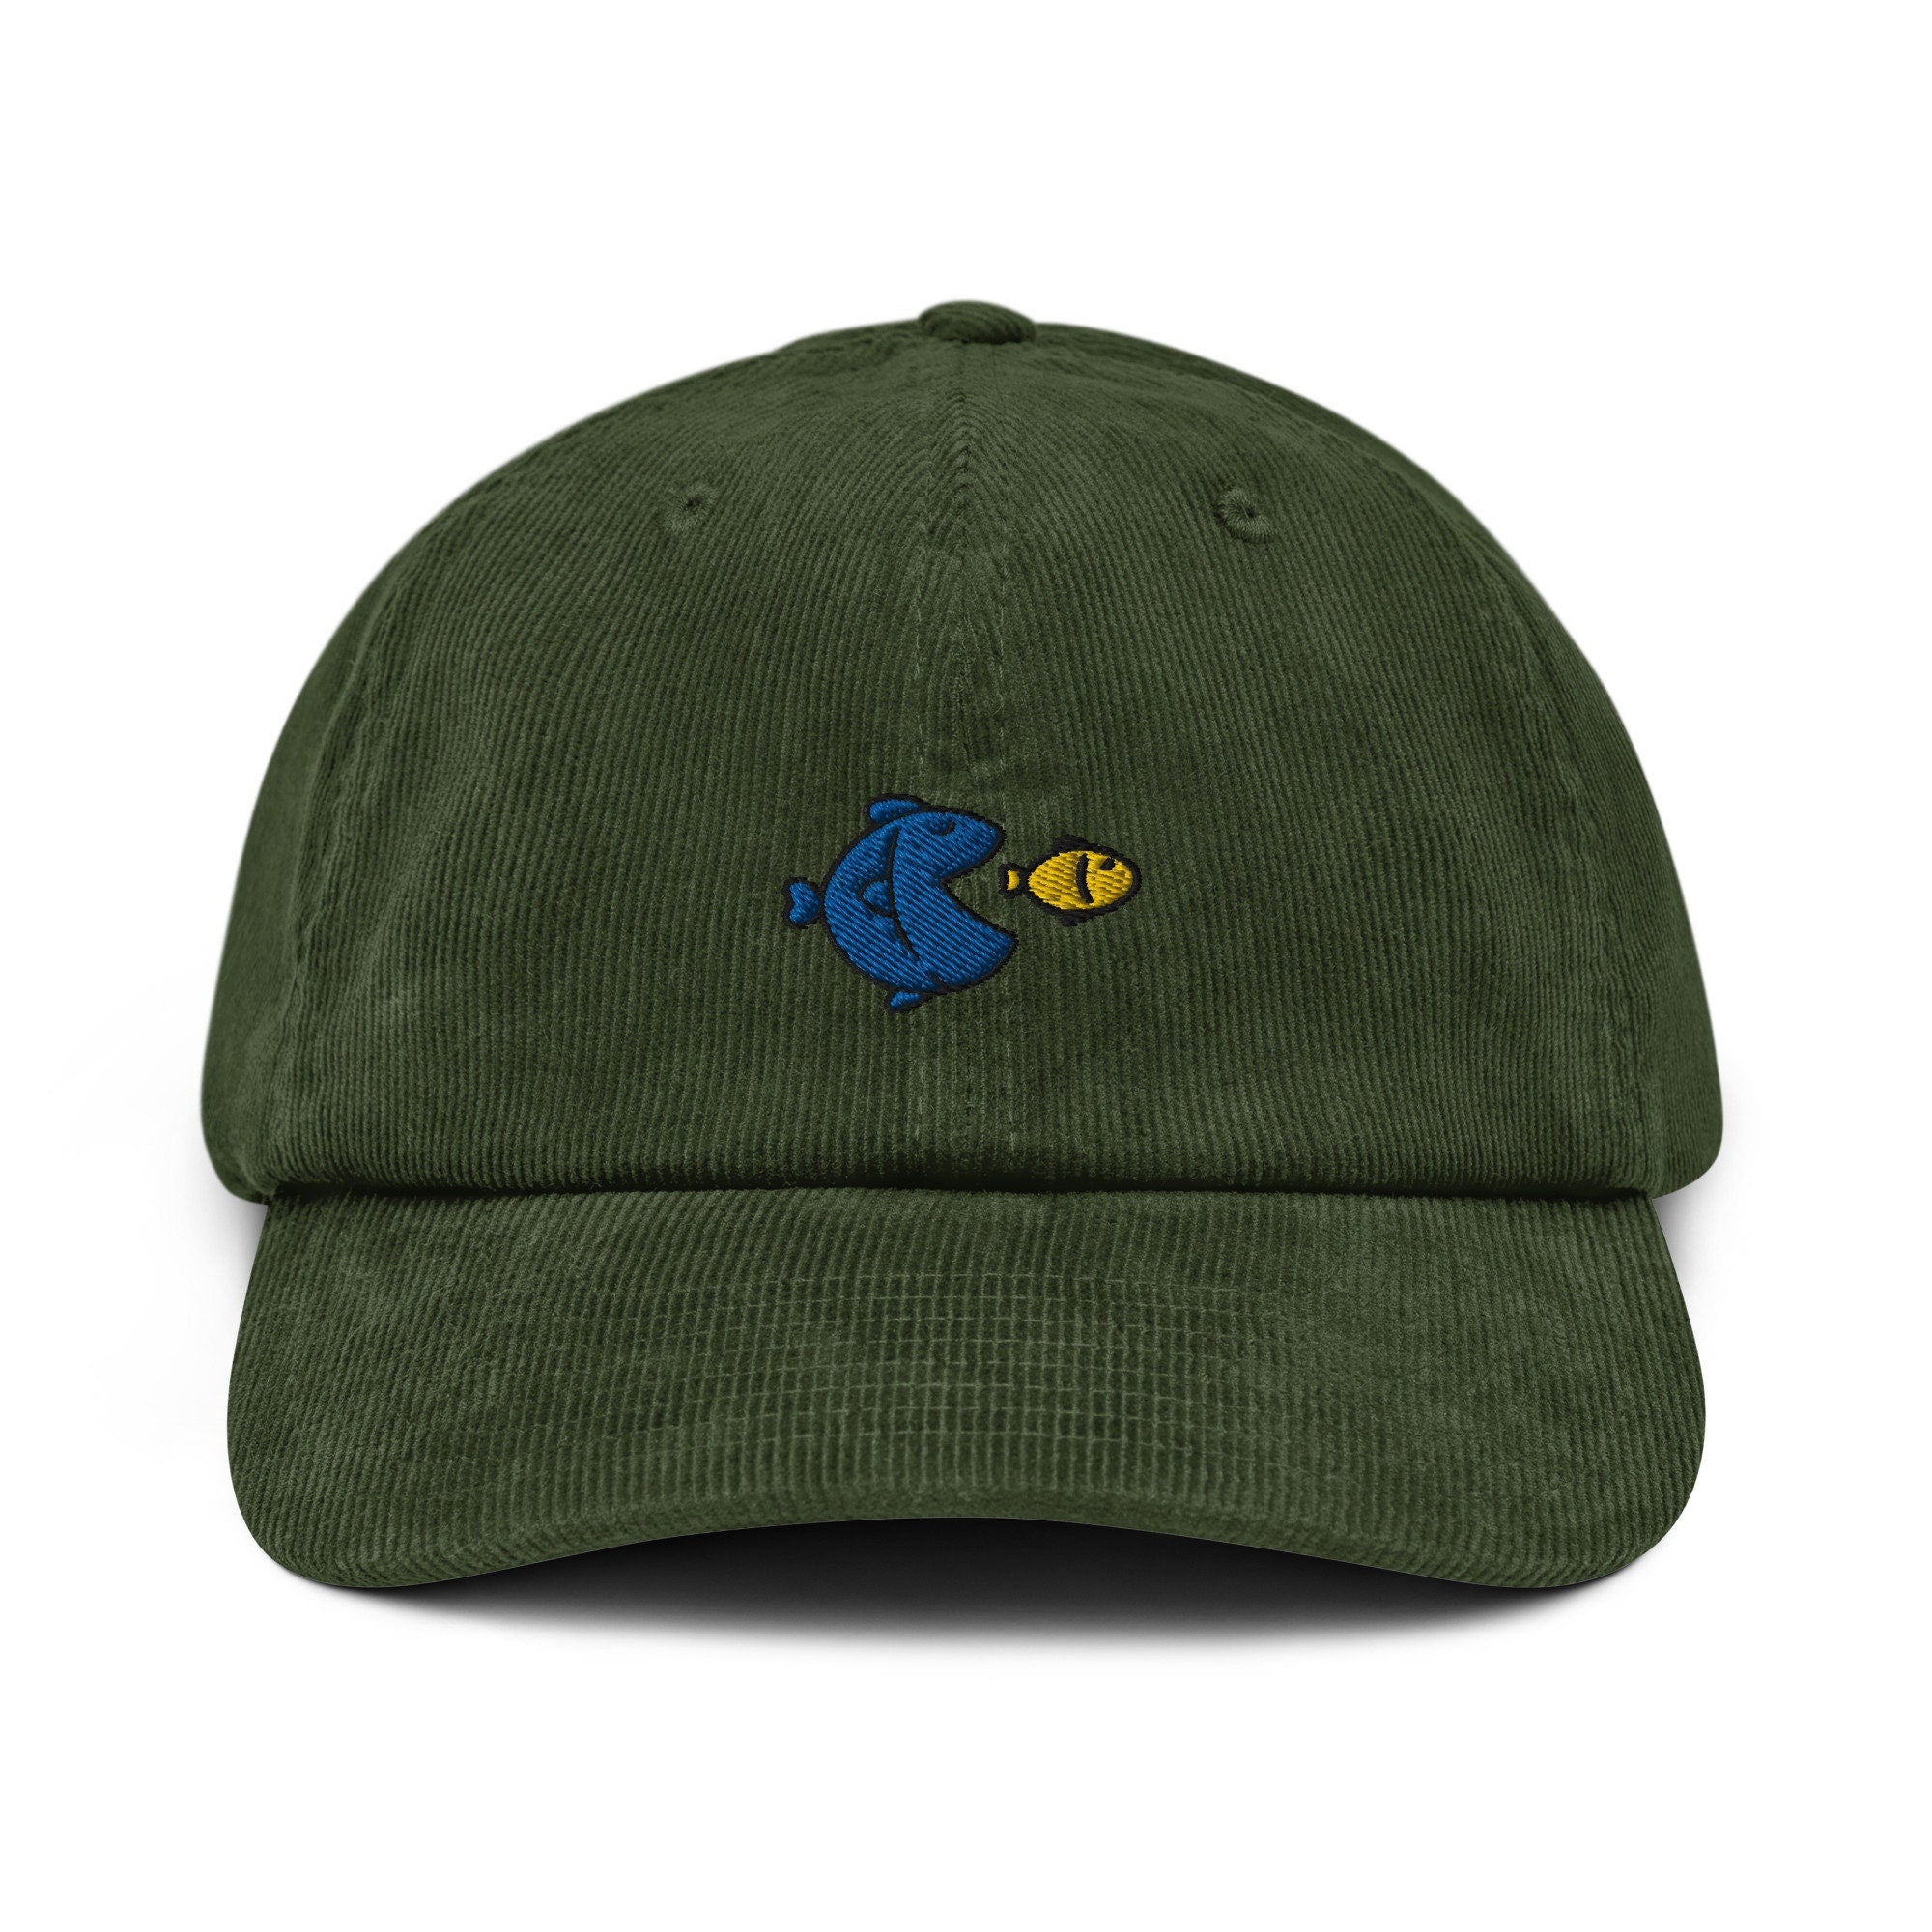 Capitalism Fish Corduroy Hat, Handmade Embroidered Corduroy Dad Cap - Multiple Colors